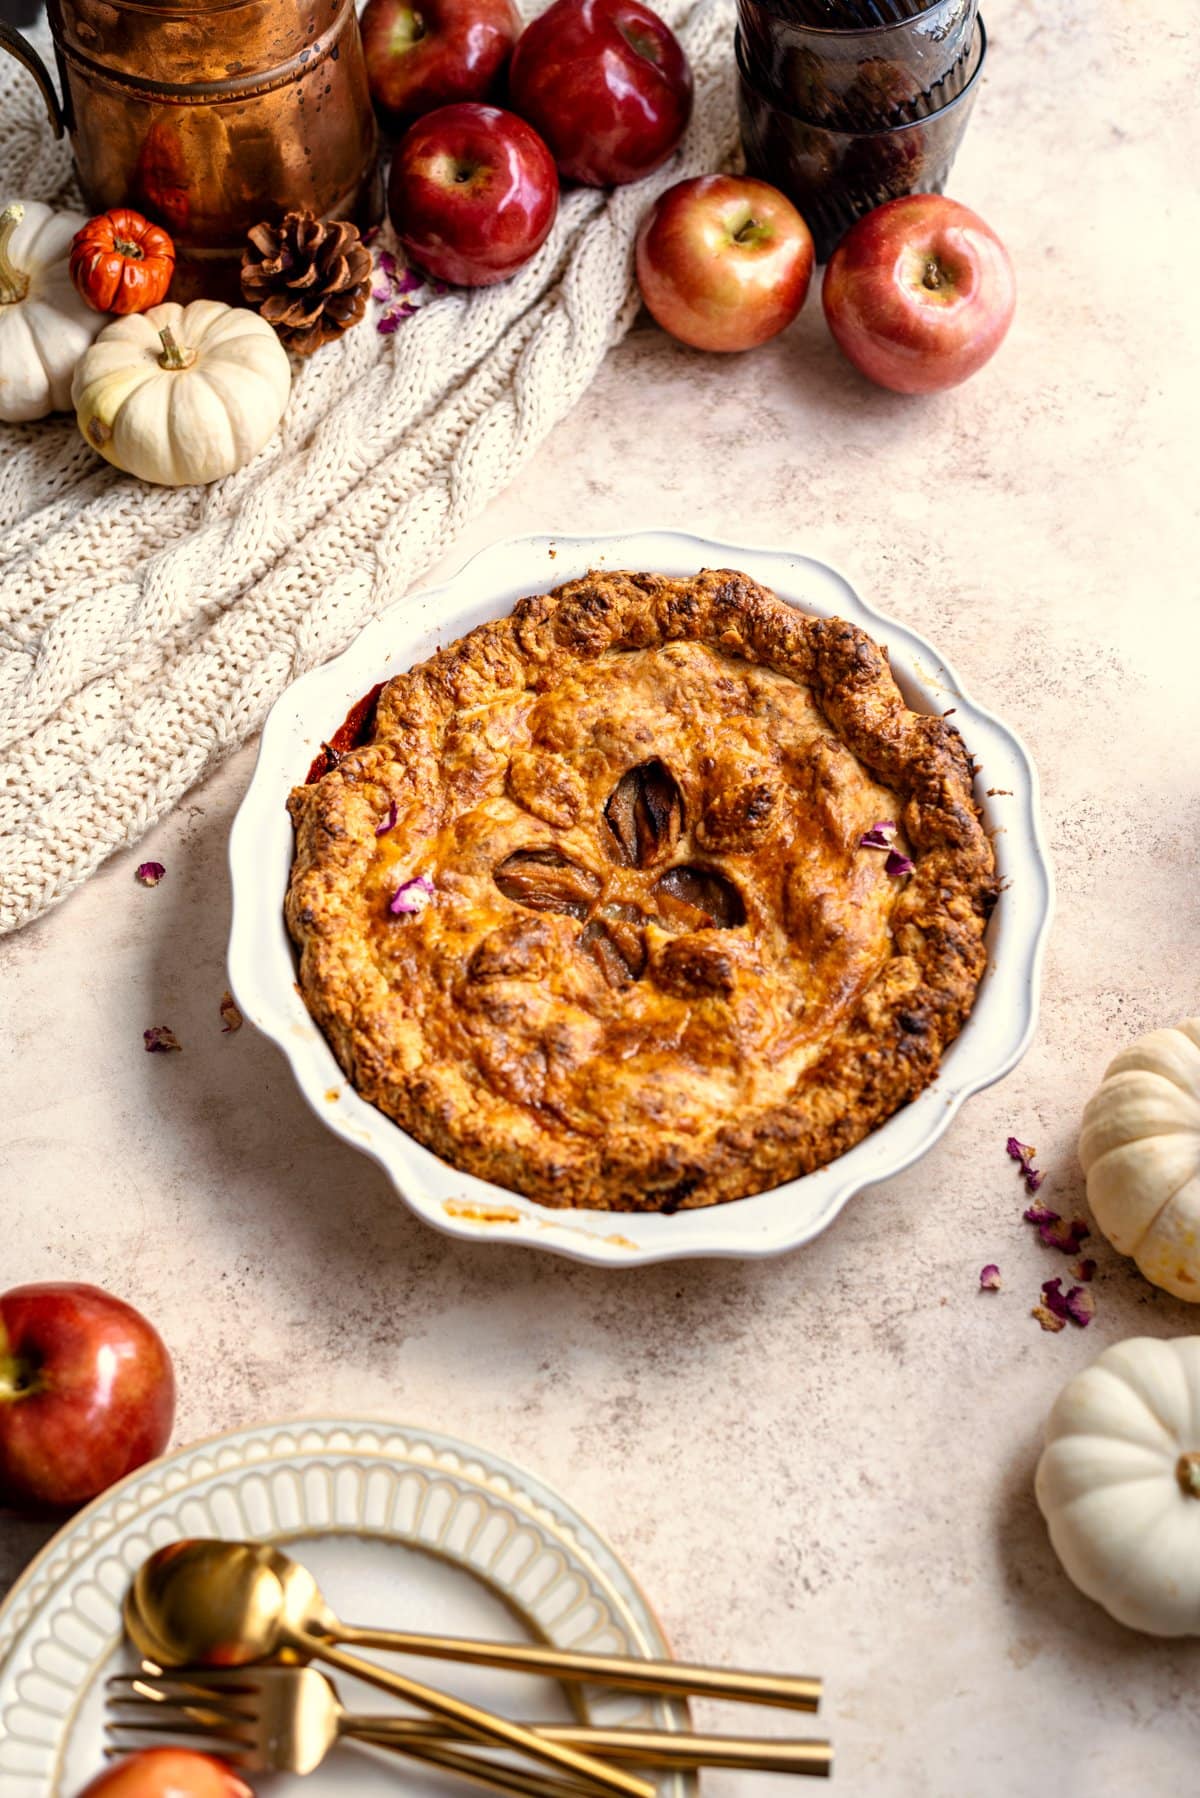 Cheddar apple pie surrounded by apples and pumpkins on a brown table.